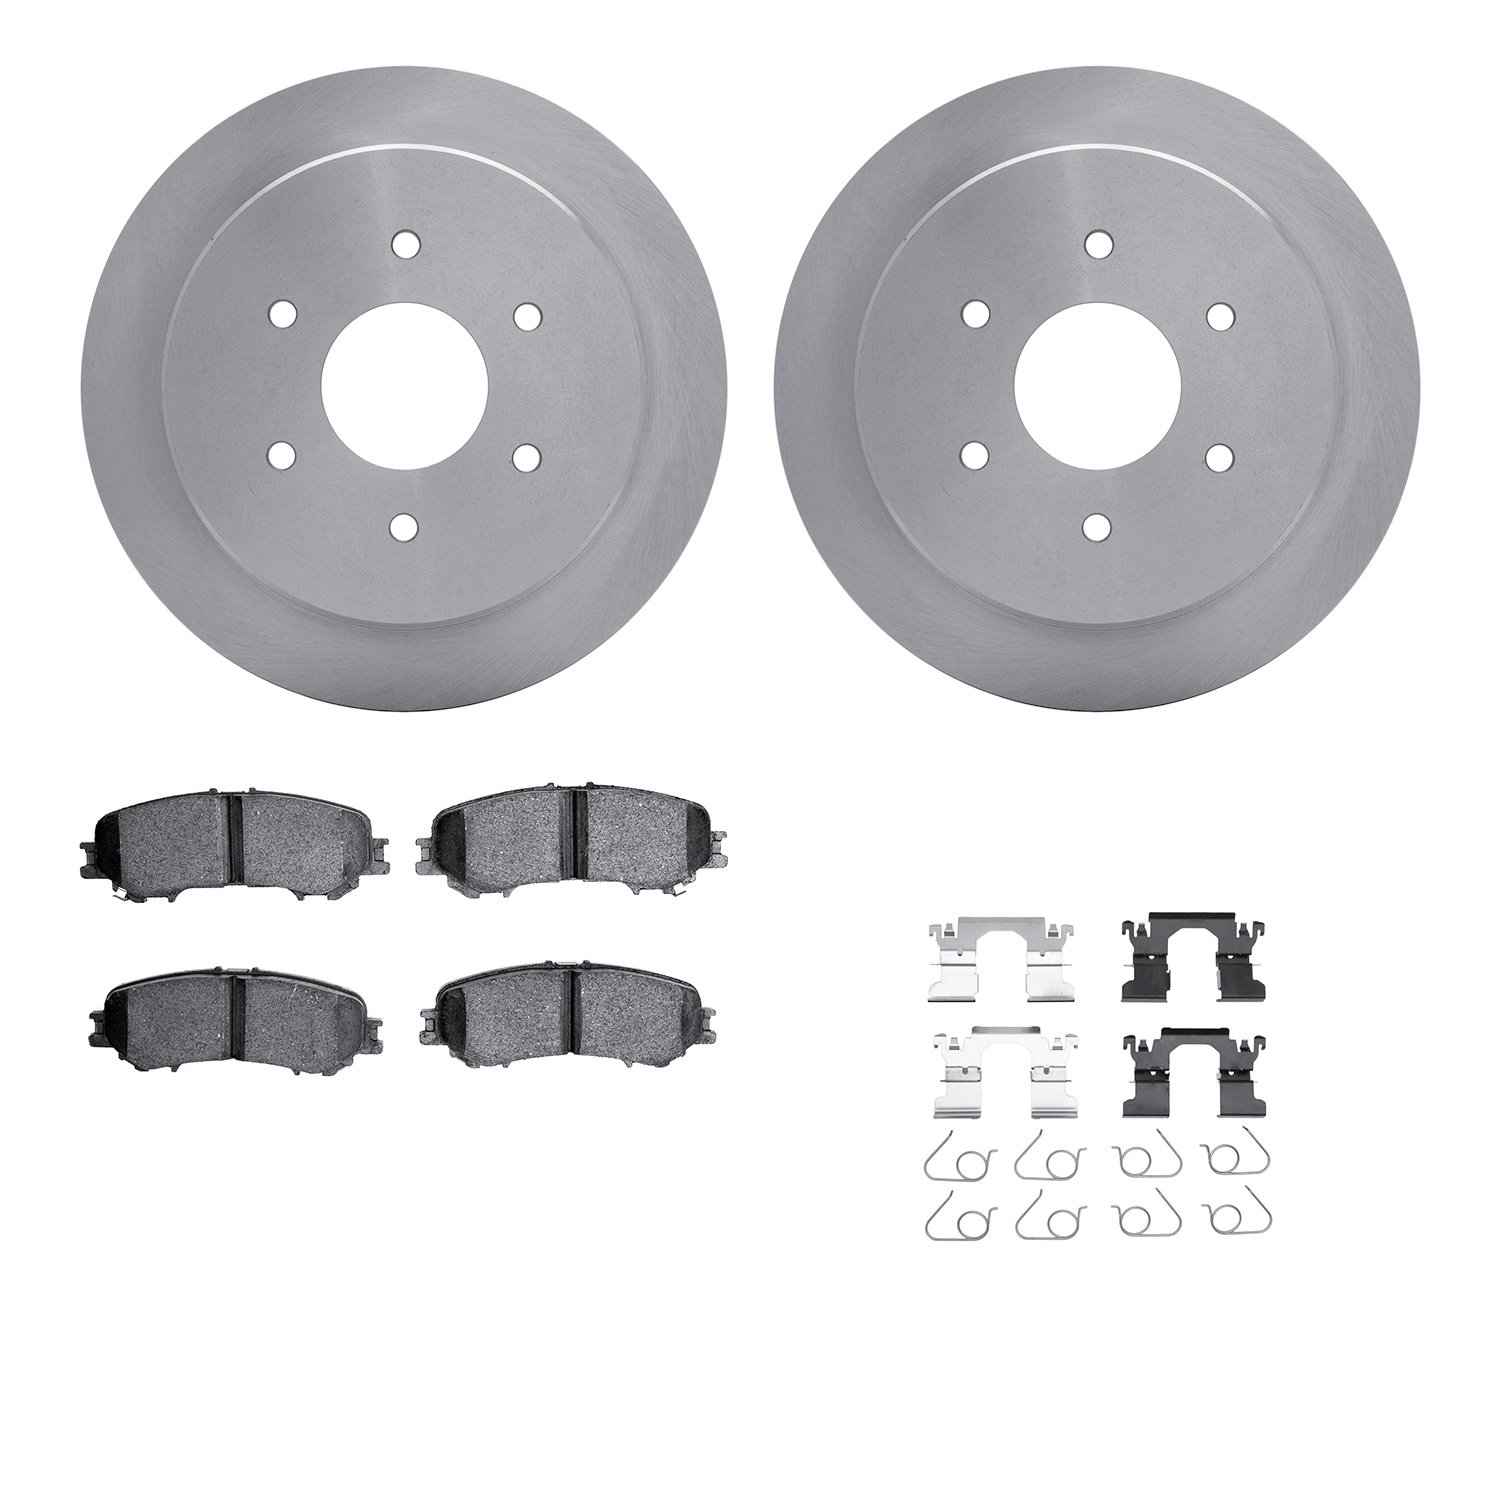 6312-67131 Brake Rotors with 3000-Series Ceramic Brake Pads Kit with Hardware, Fits Select Infiniti/Nissan, Position: Rear